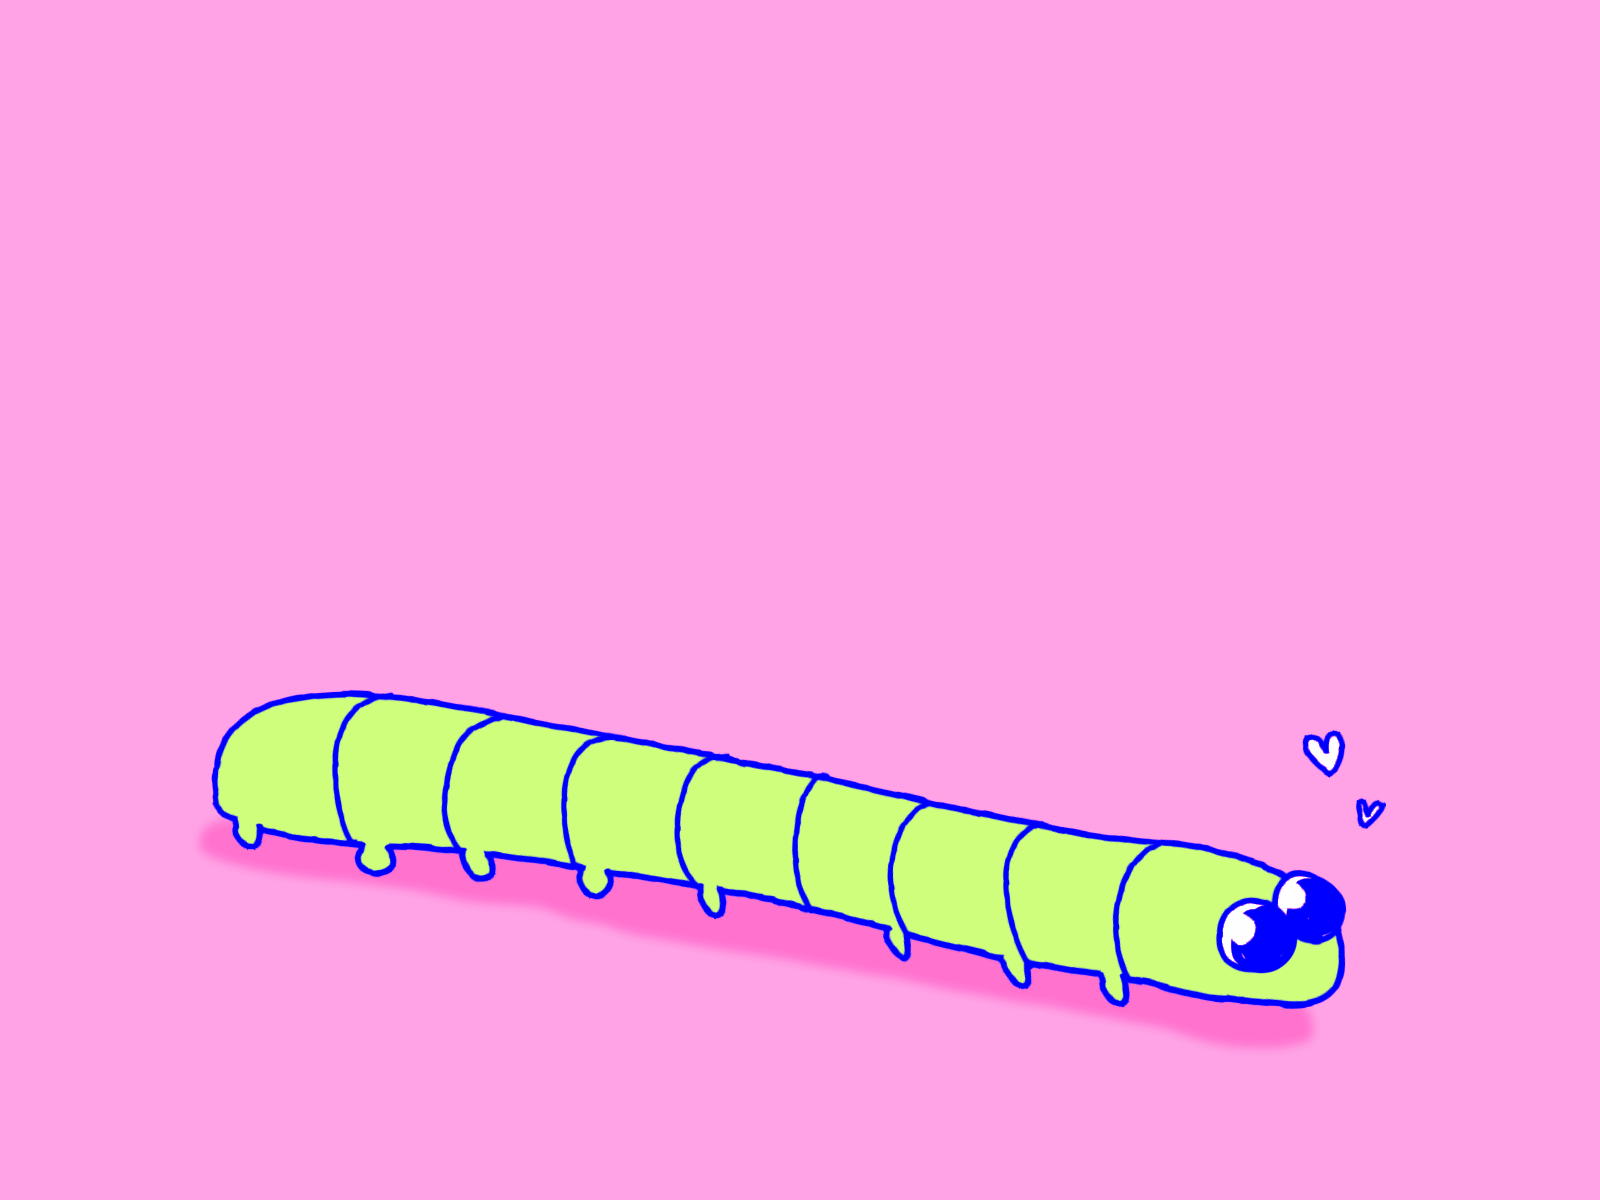 caterpillar 2d animation animated gif animation animation 2d cel animation cute frame by frame gif pink walk cycle